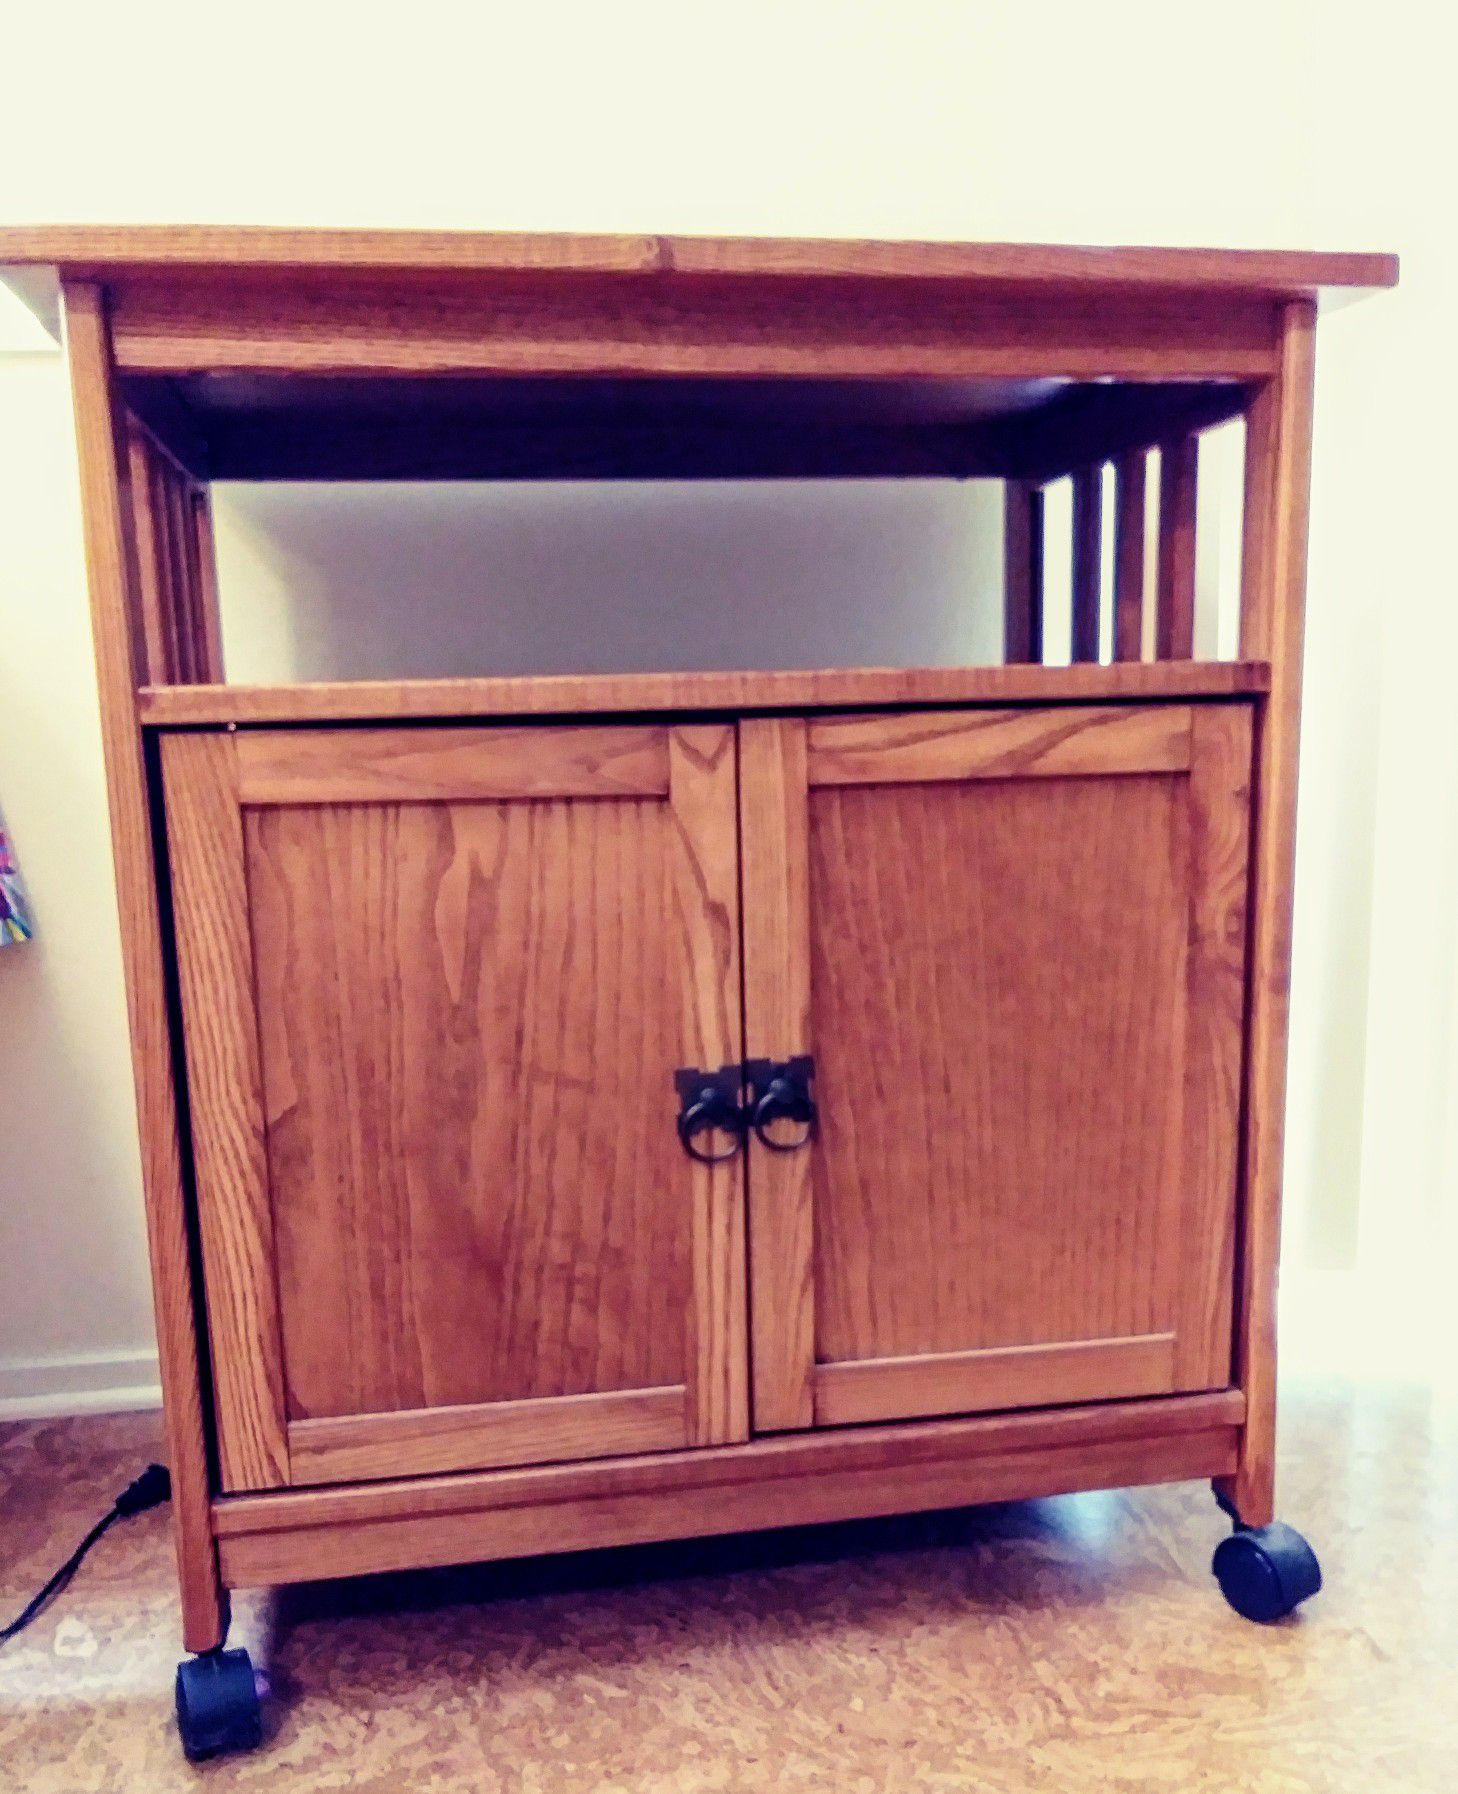 LL Bean Mission Style Media Cabinet